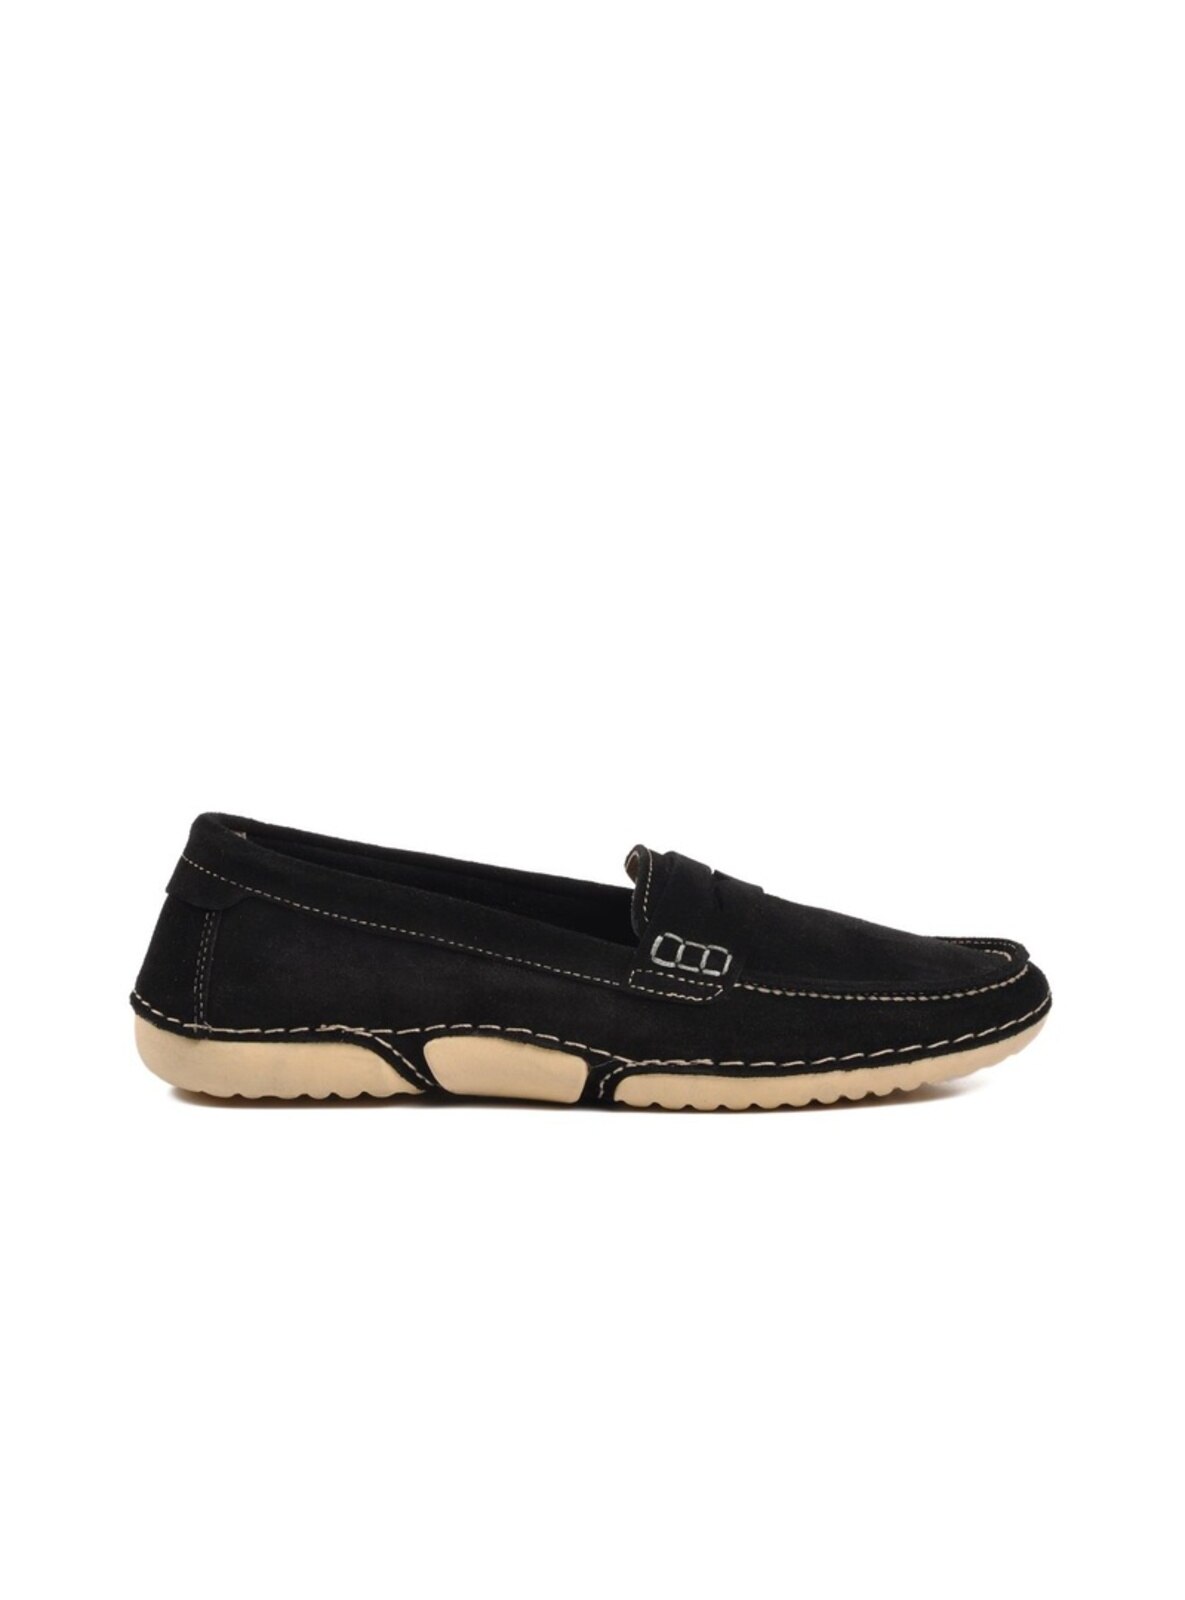 Black Suede - Casual Shoes